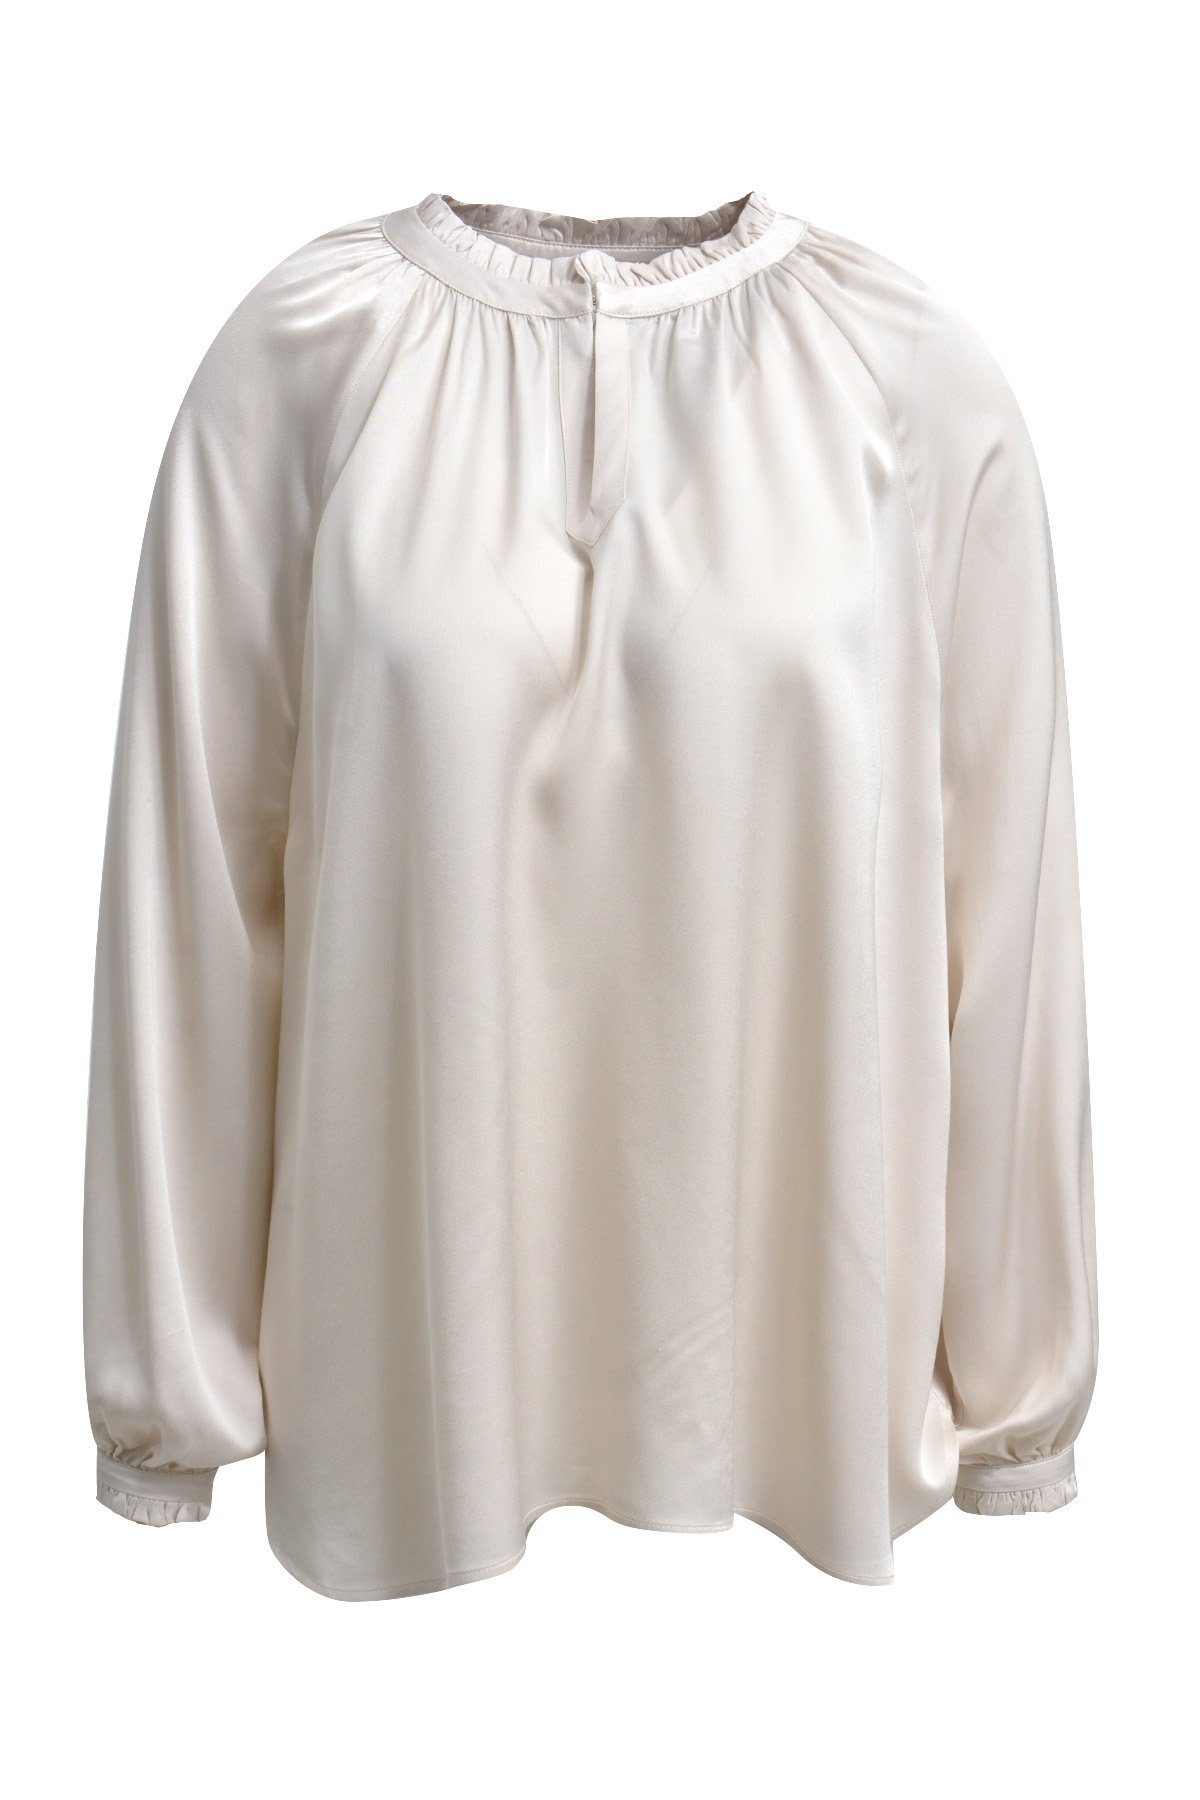 AND AND V-NECK W Milano Italy Blusentop GAT RUFFELS BLOUSE